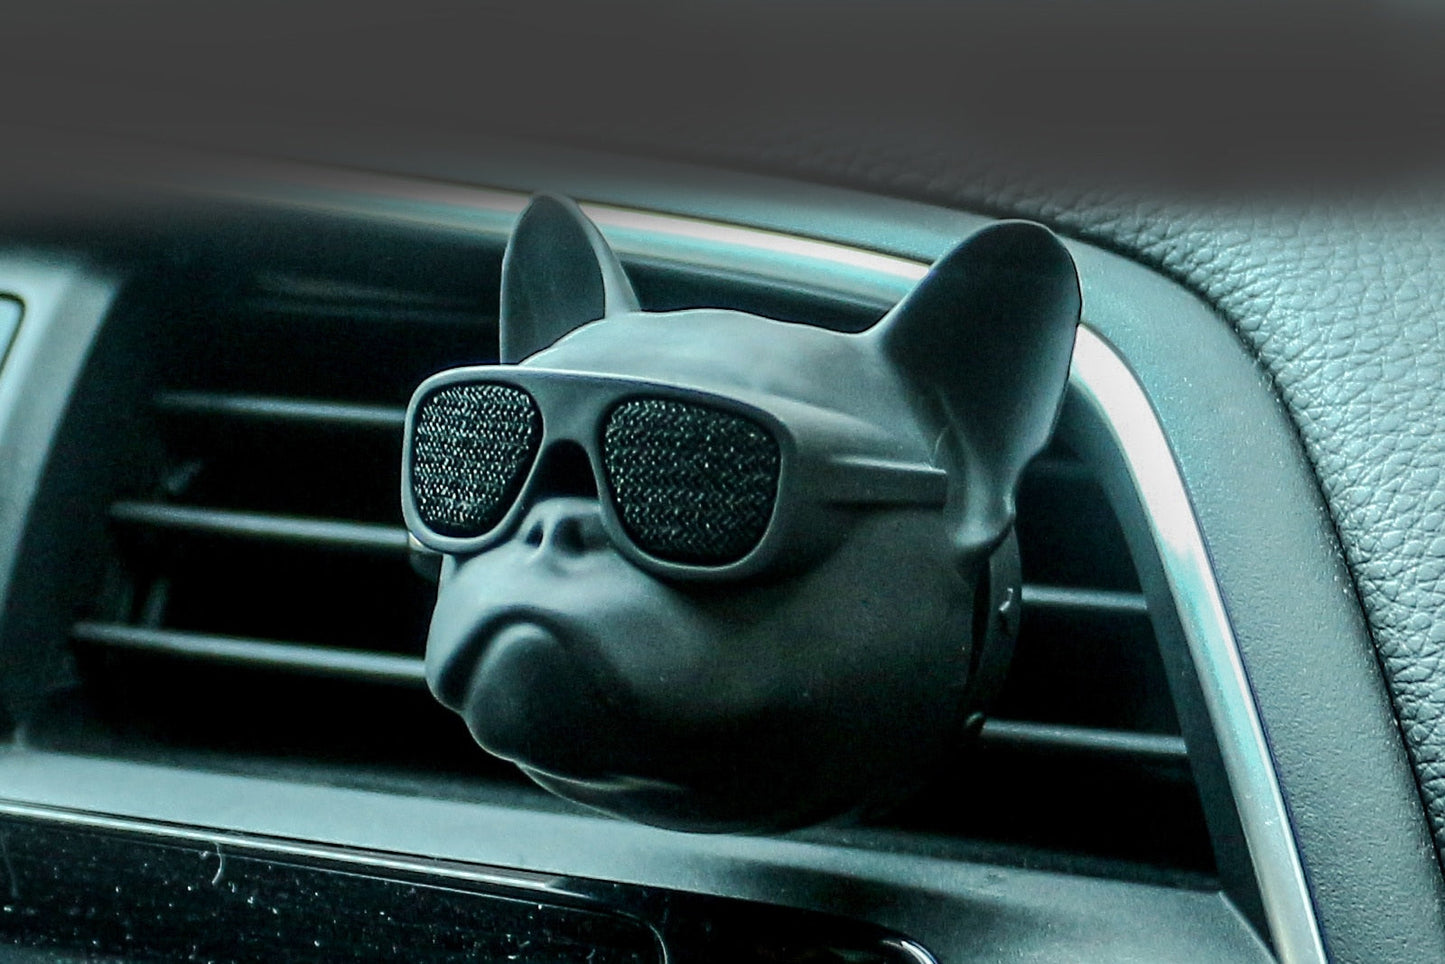 French Bulldog Car Air freshener - Style's Bug Black / Without any incense flakes